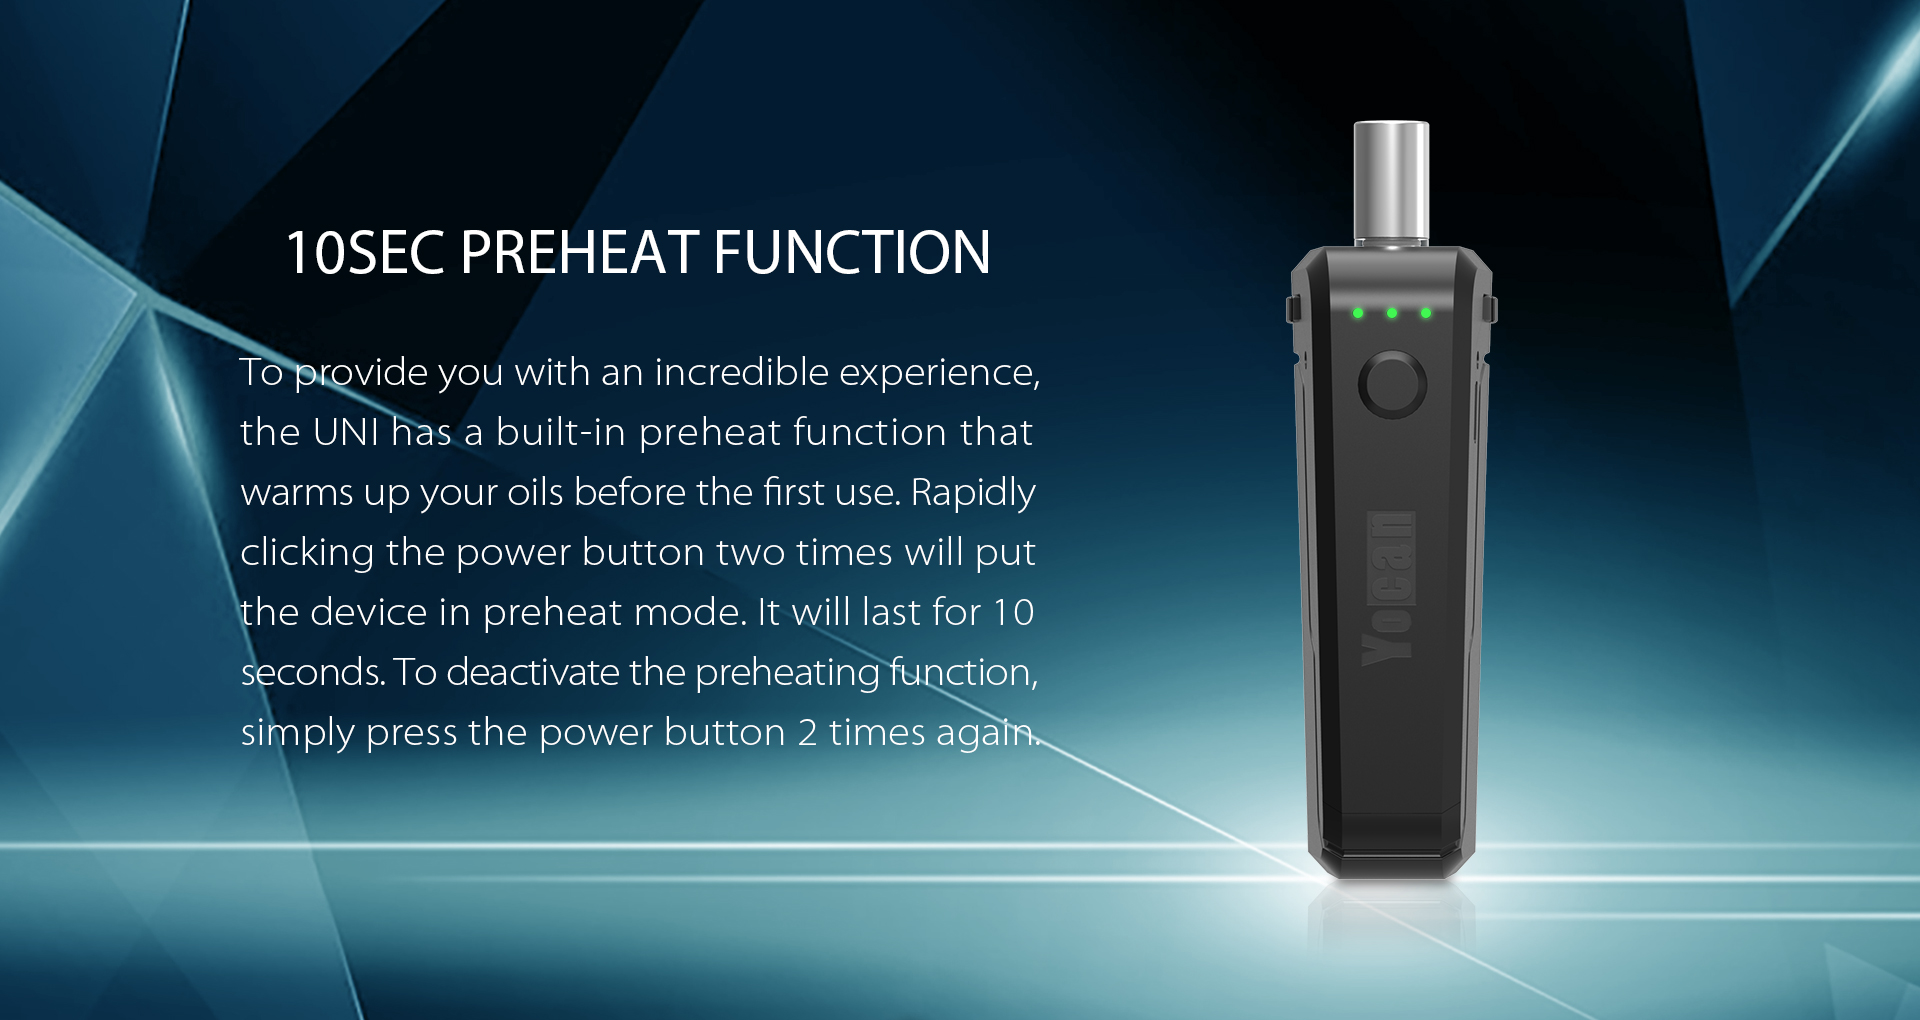 Yocan UNI has a built-in preheat function that warms up your oils before the first use.